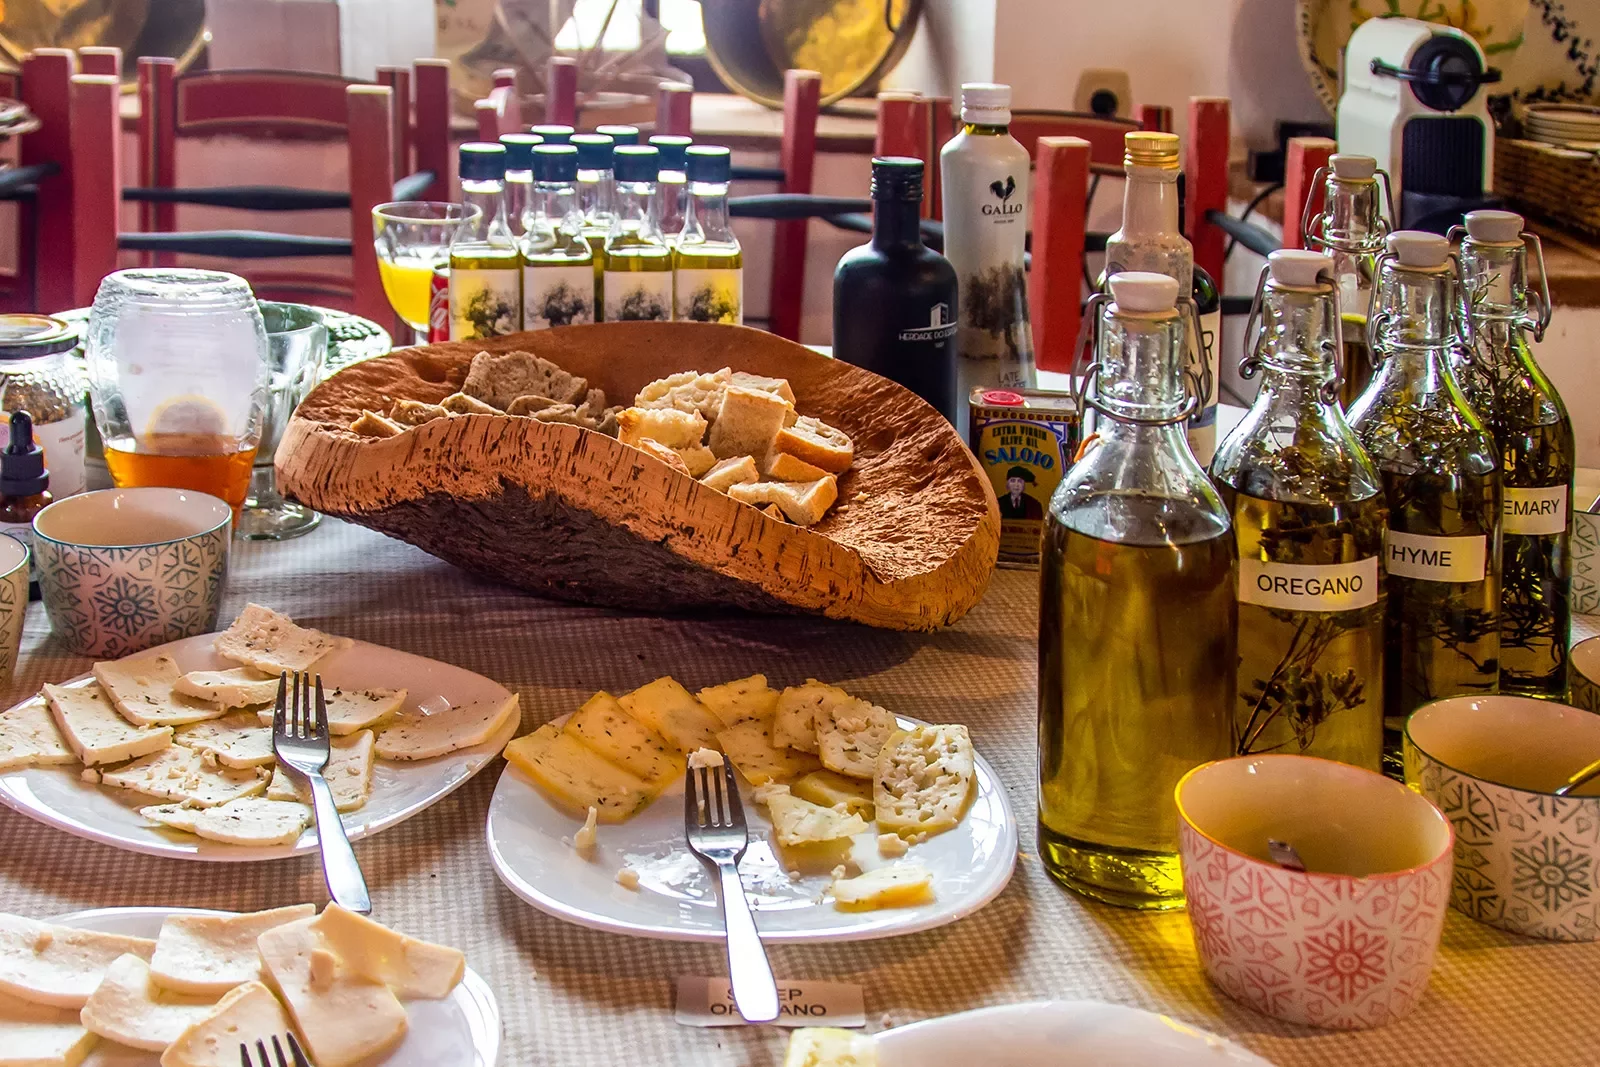 Cheese plates with bottles of olive oil.